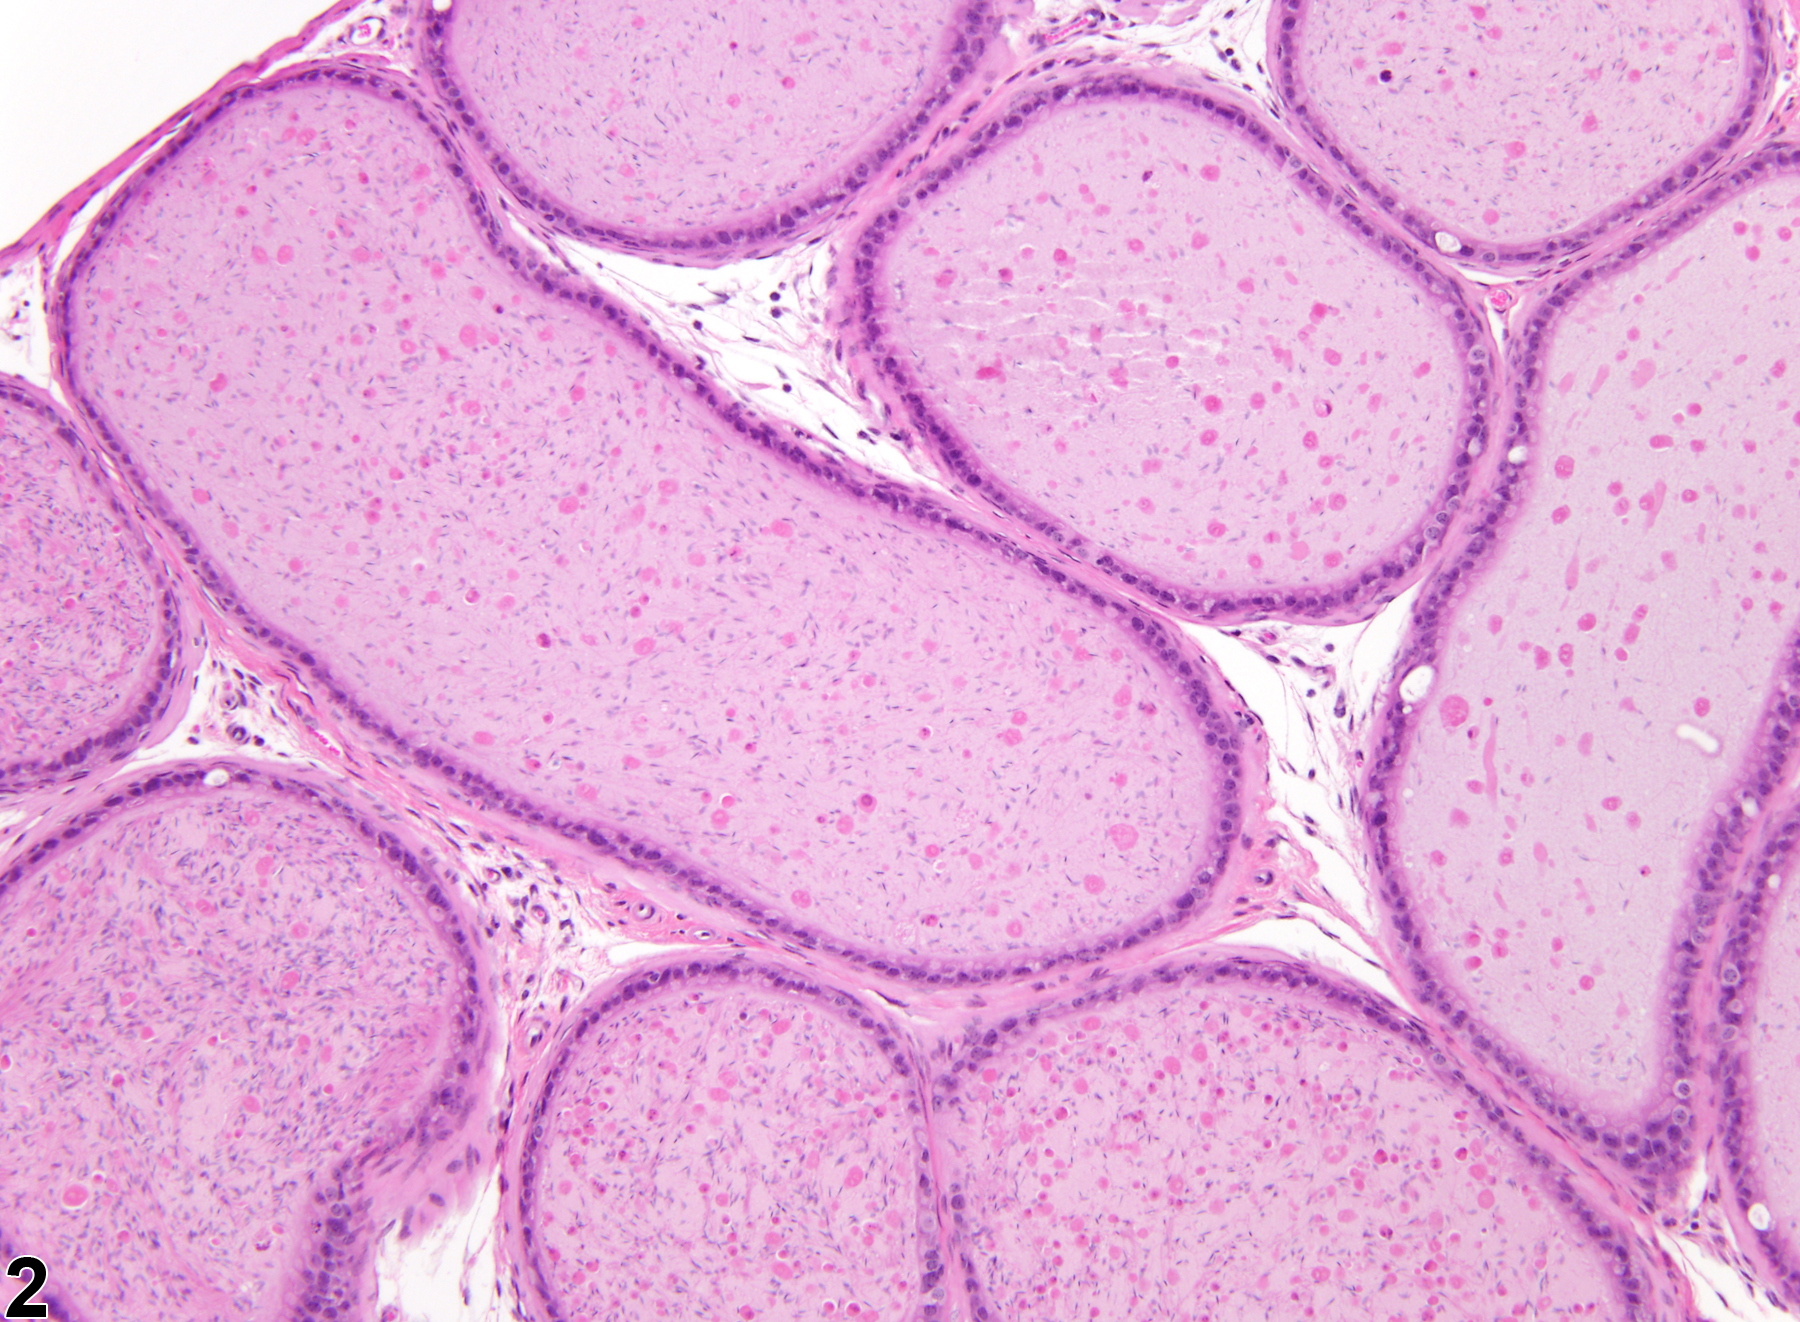 Image of hypospermia in the epididymis from a male B6C3F1 mouse in a subchronic study